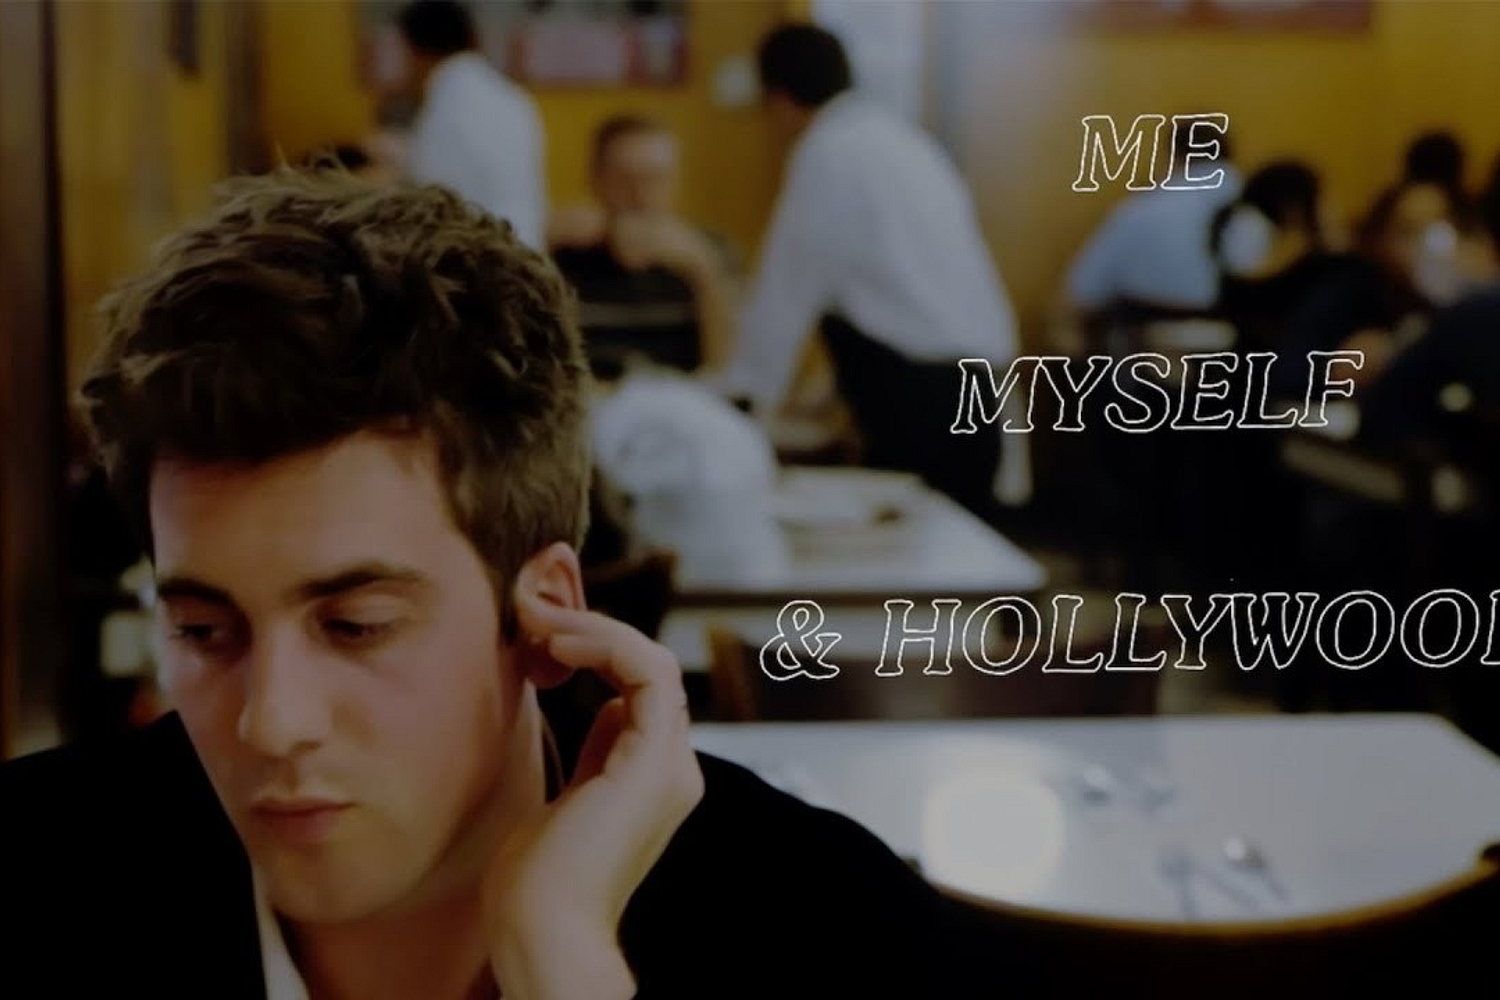 Circa Waves share ‘Me, Myself & Hollywood’ with self-directed video